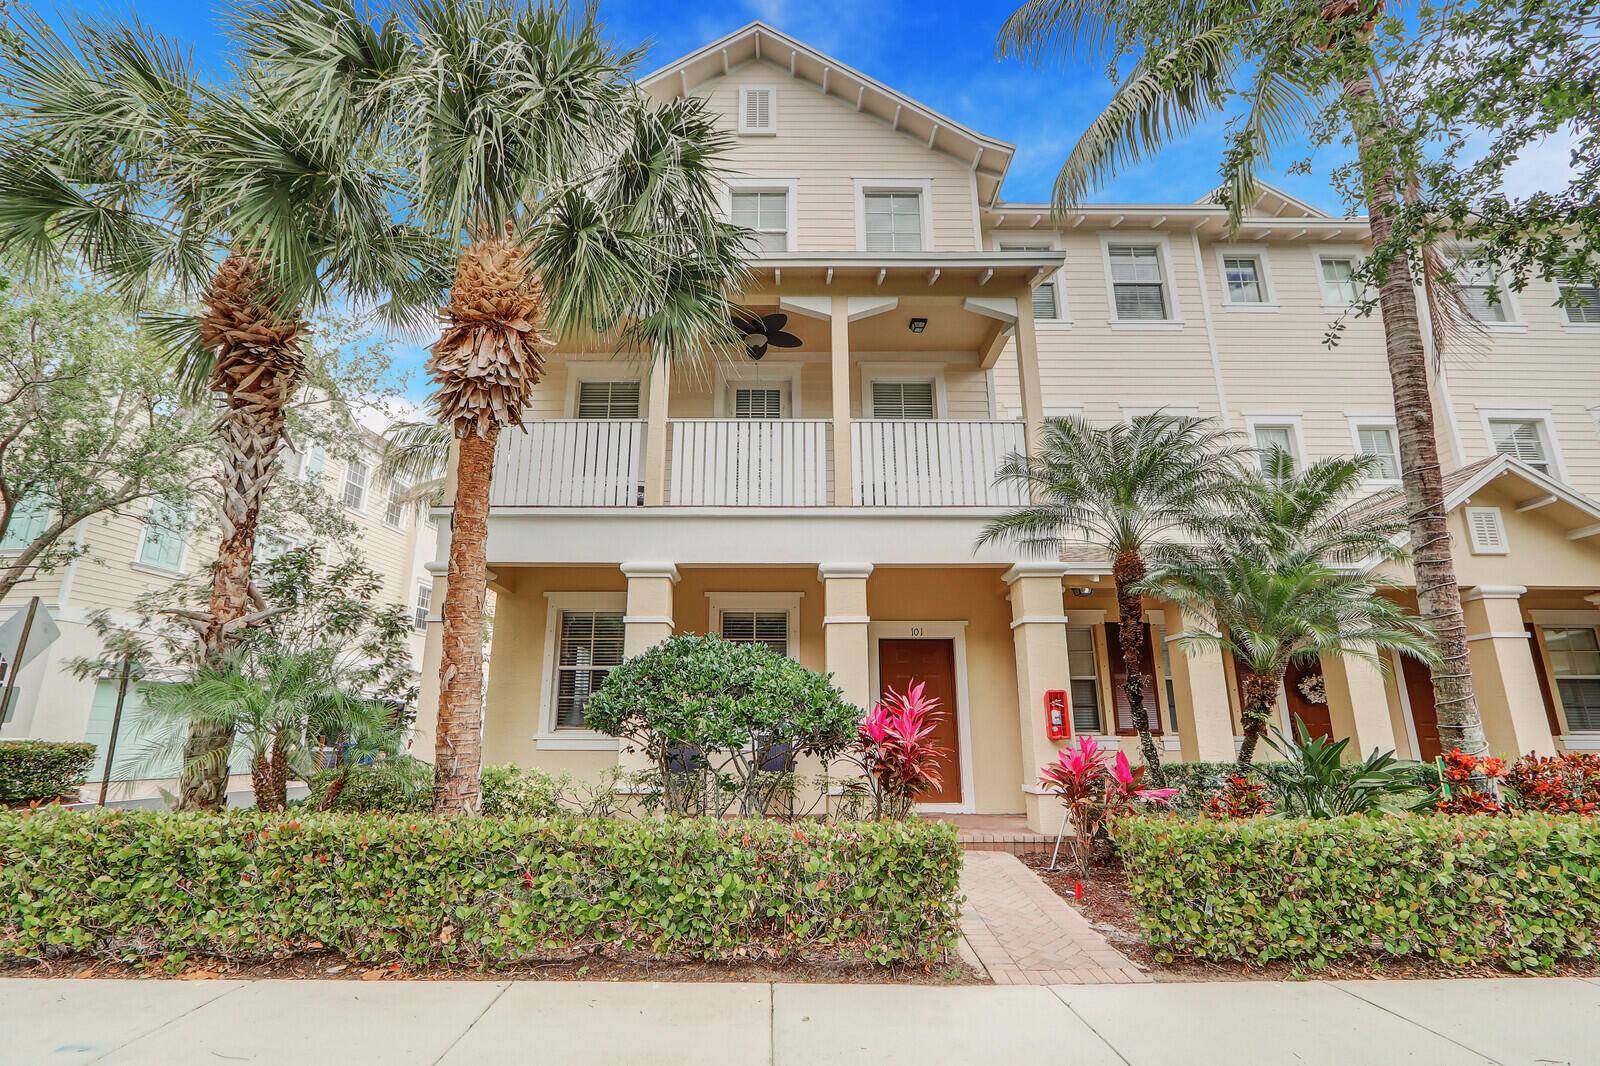 3 Bedroom corner unit 3 story townhome in the heart of Jupiter.